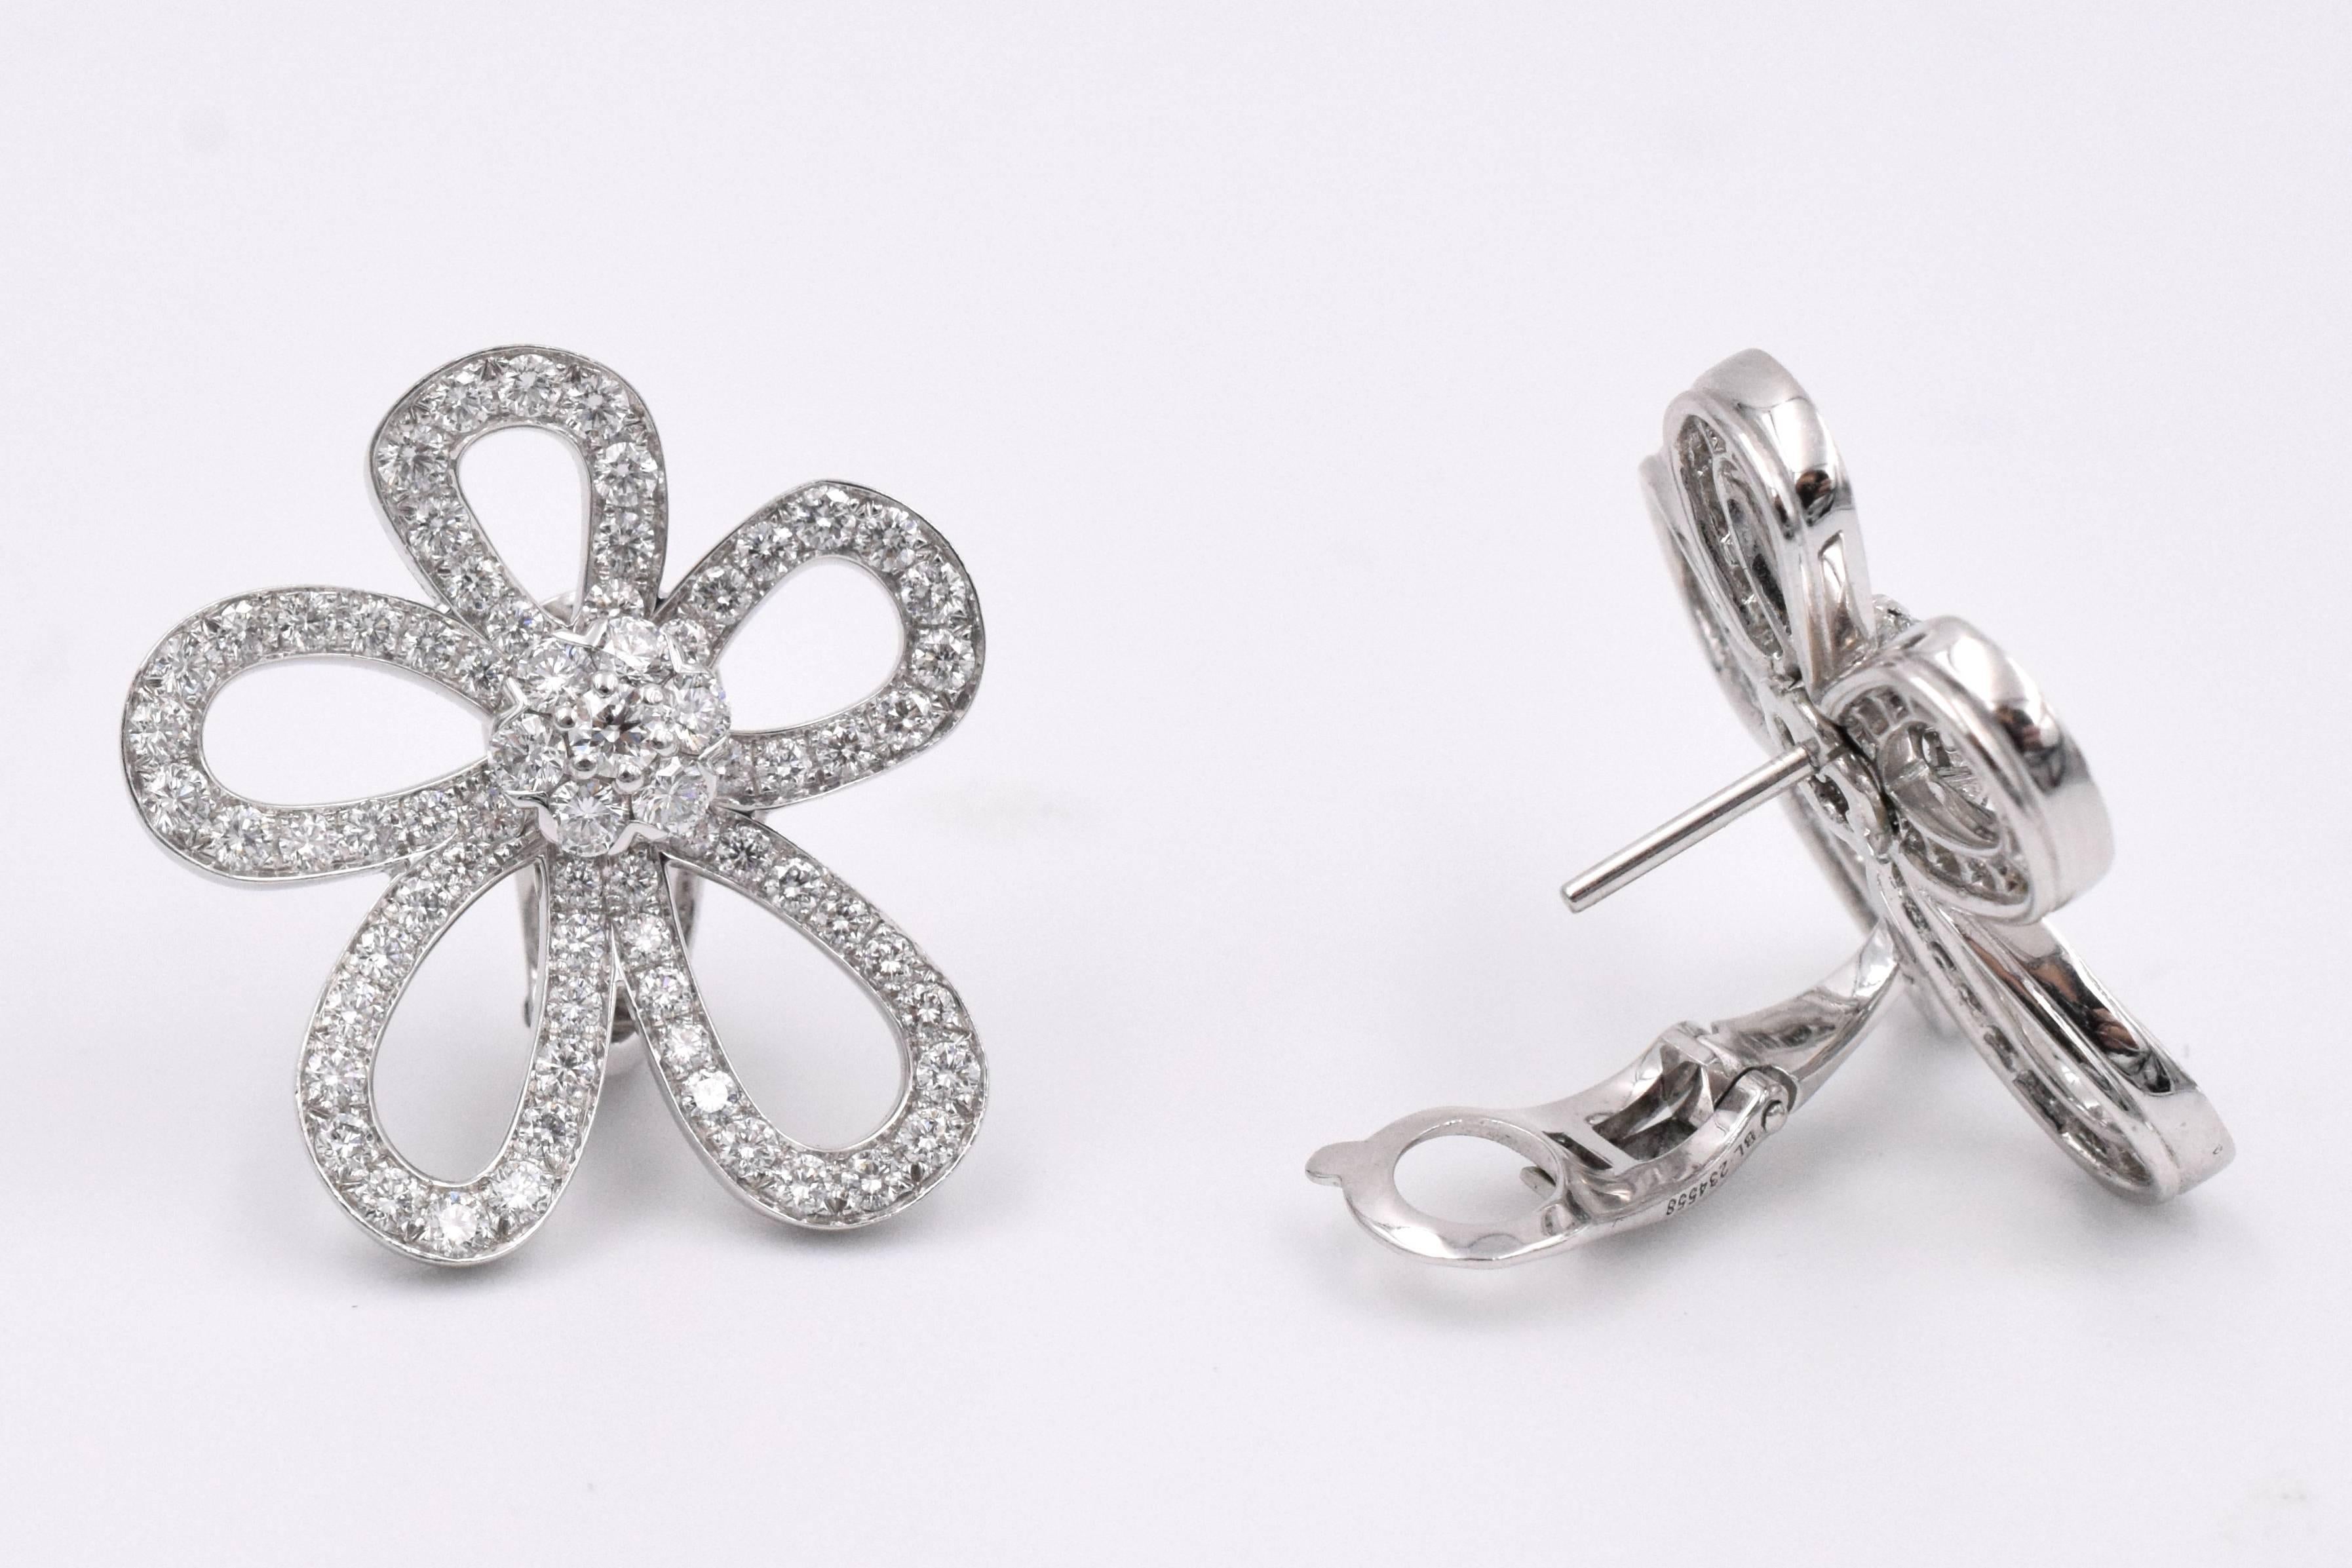 V.C.A. Flowerlace Earrings in 18k White Gold.
Centered around a sparking fleurette motif, the elegant curved diamond petals give a light airy look to these delicately extravagant ear-clips. 
142 Brilliant Cut Diamonds with a total weight around